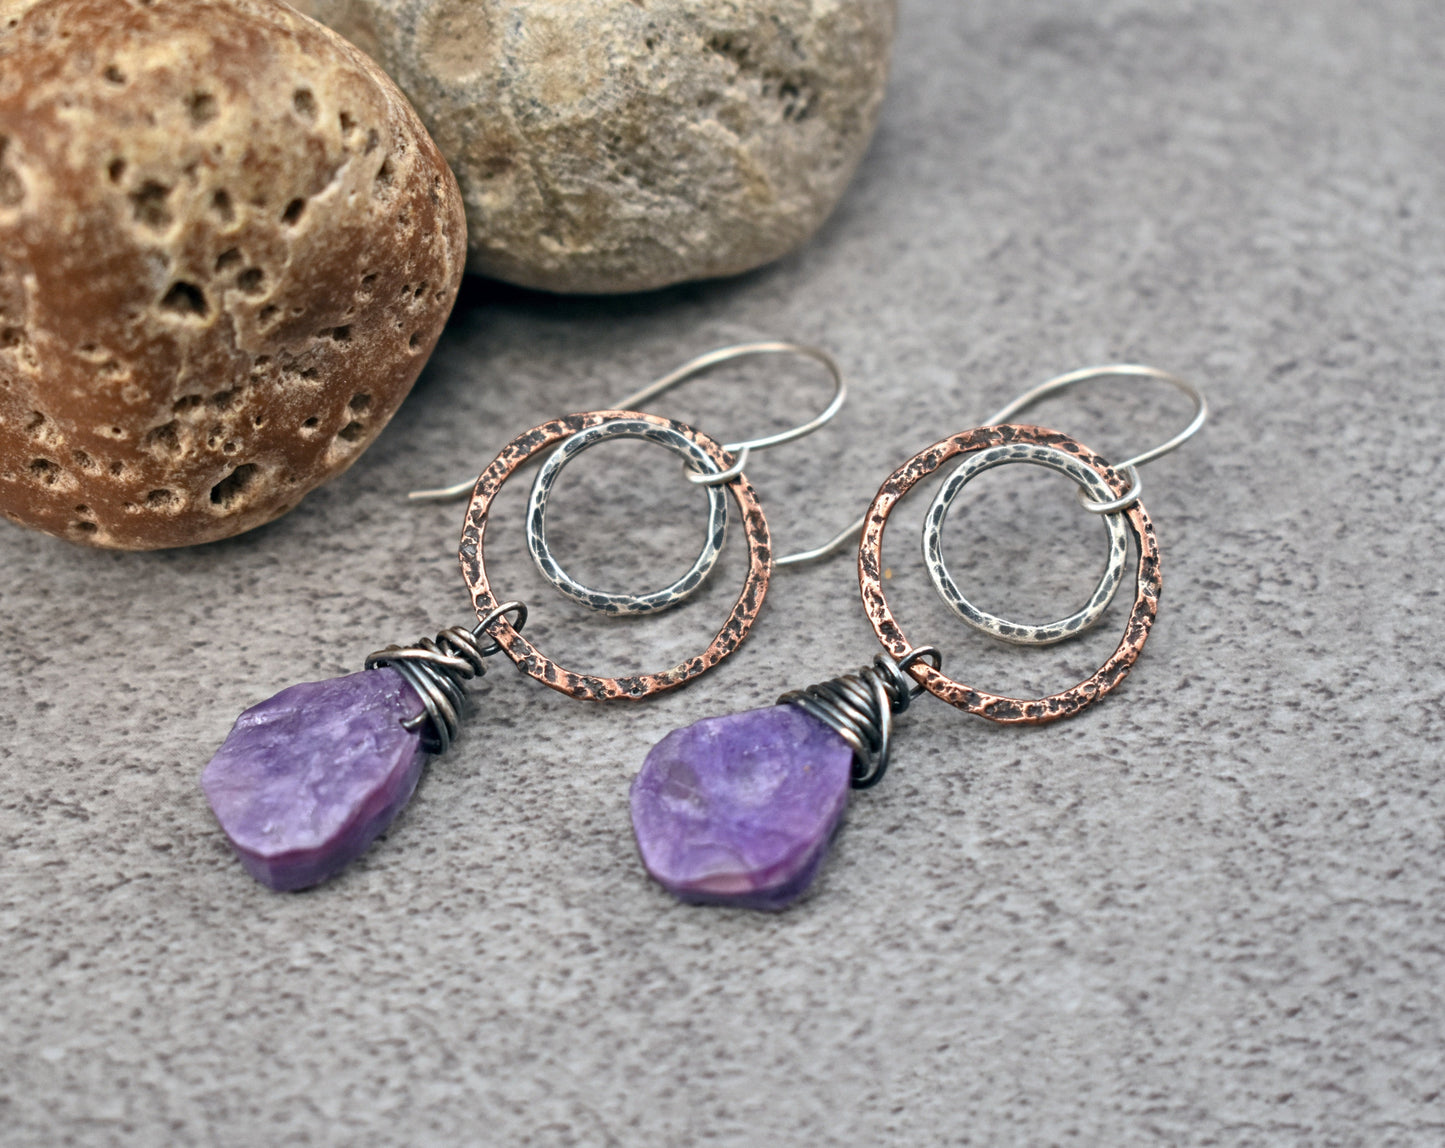 Charoite Mixed Metal Earrings, Natural Purple Gemstone Dangles, Rustic Sterling Silver Jewelry, Copper Statement Circle Earrings